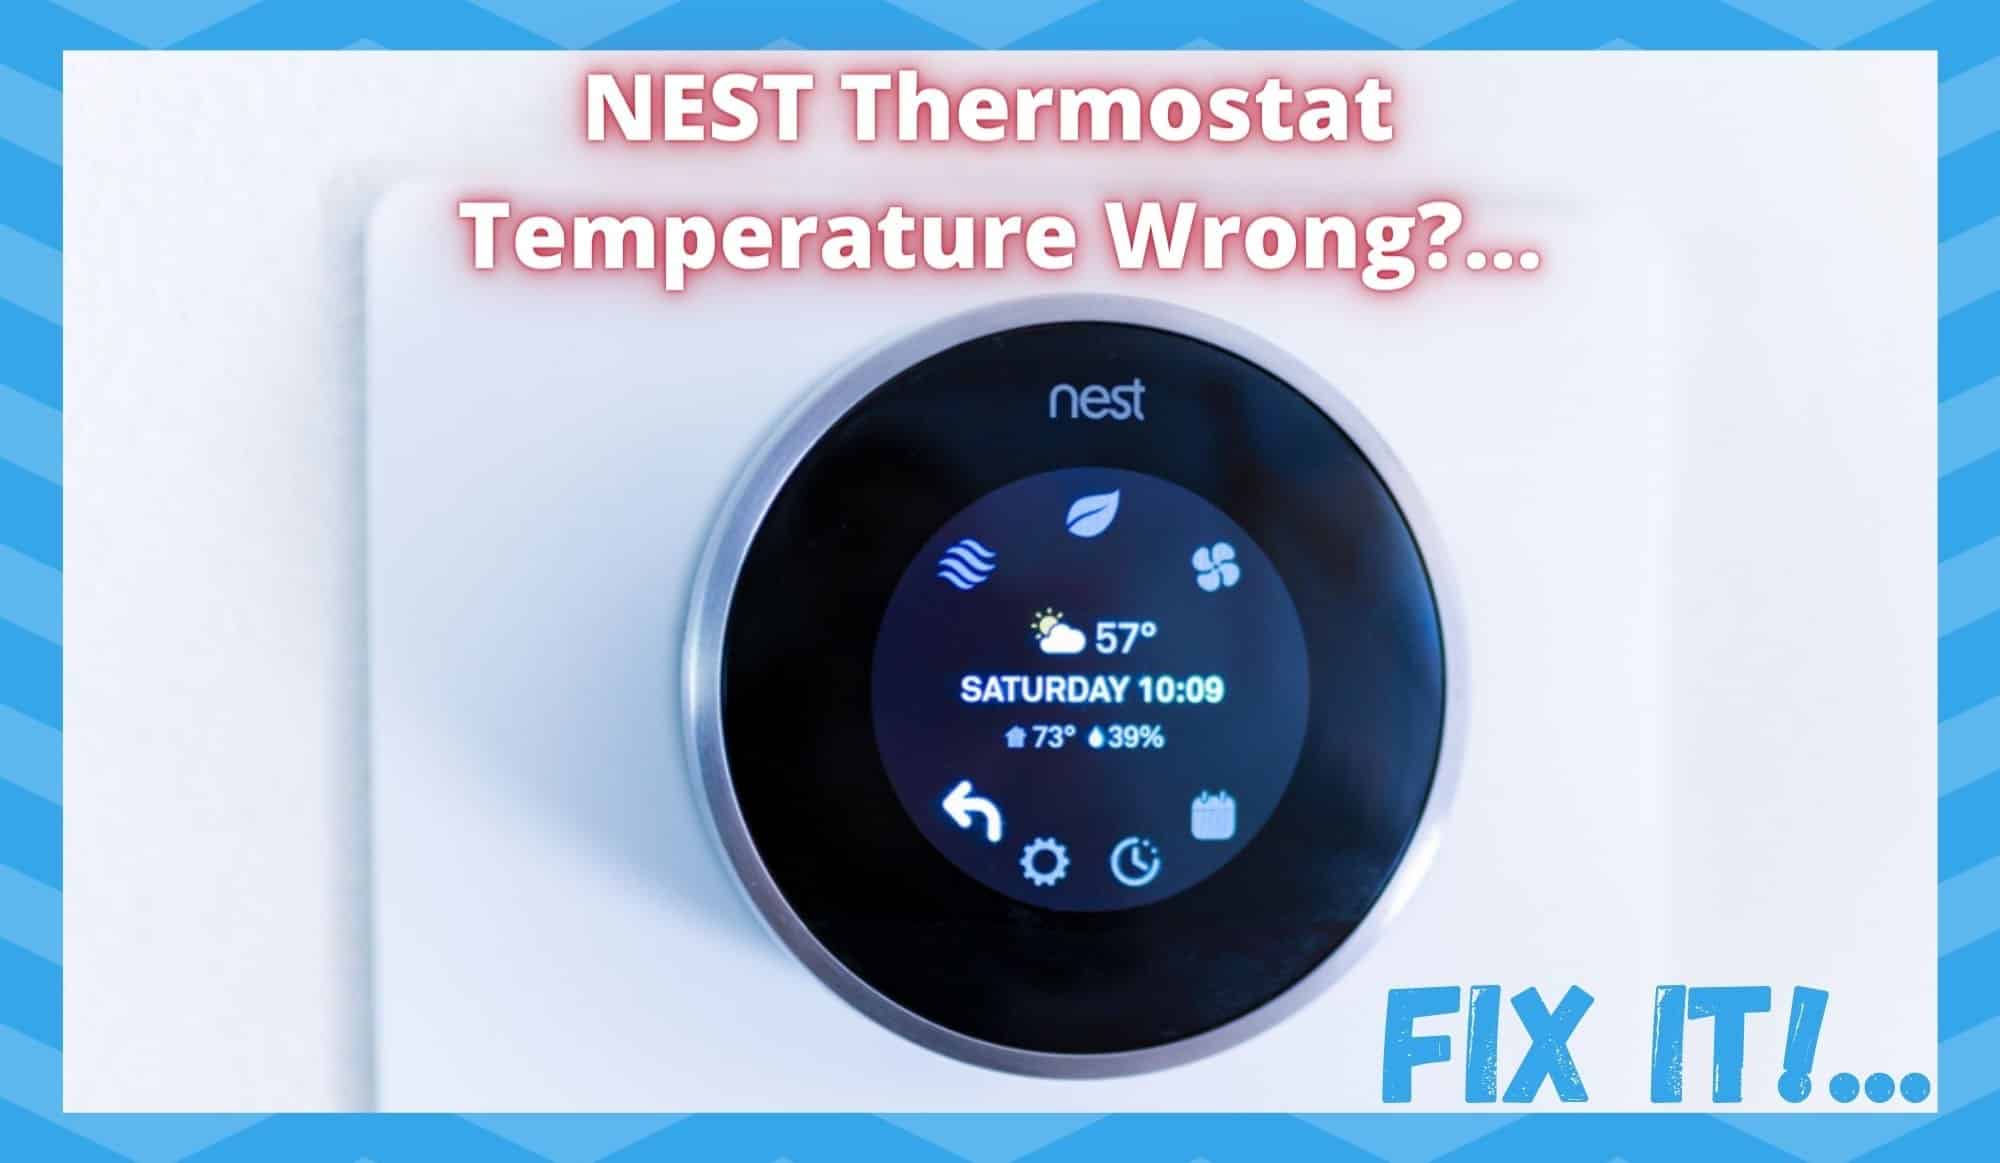 NEST Thermostat Temperature Wrong